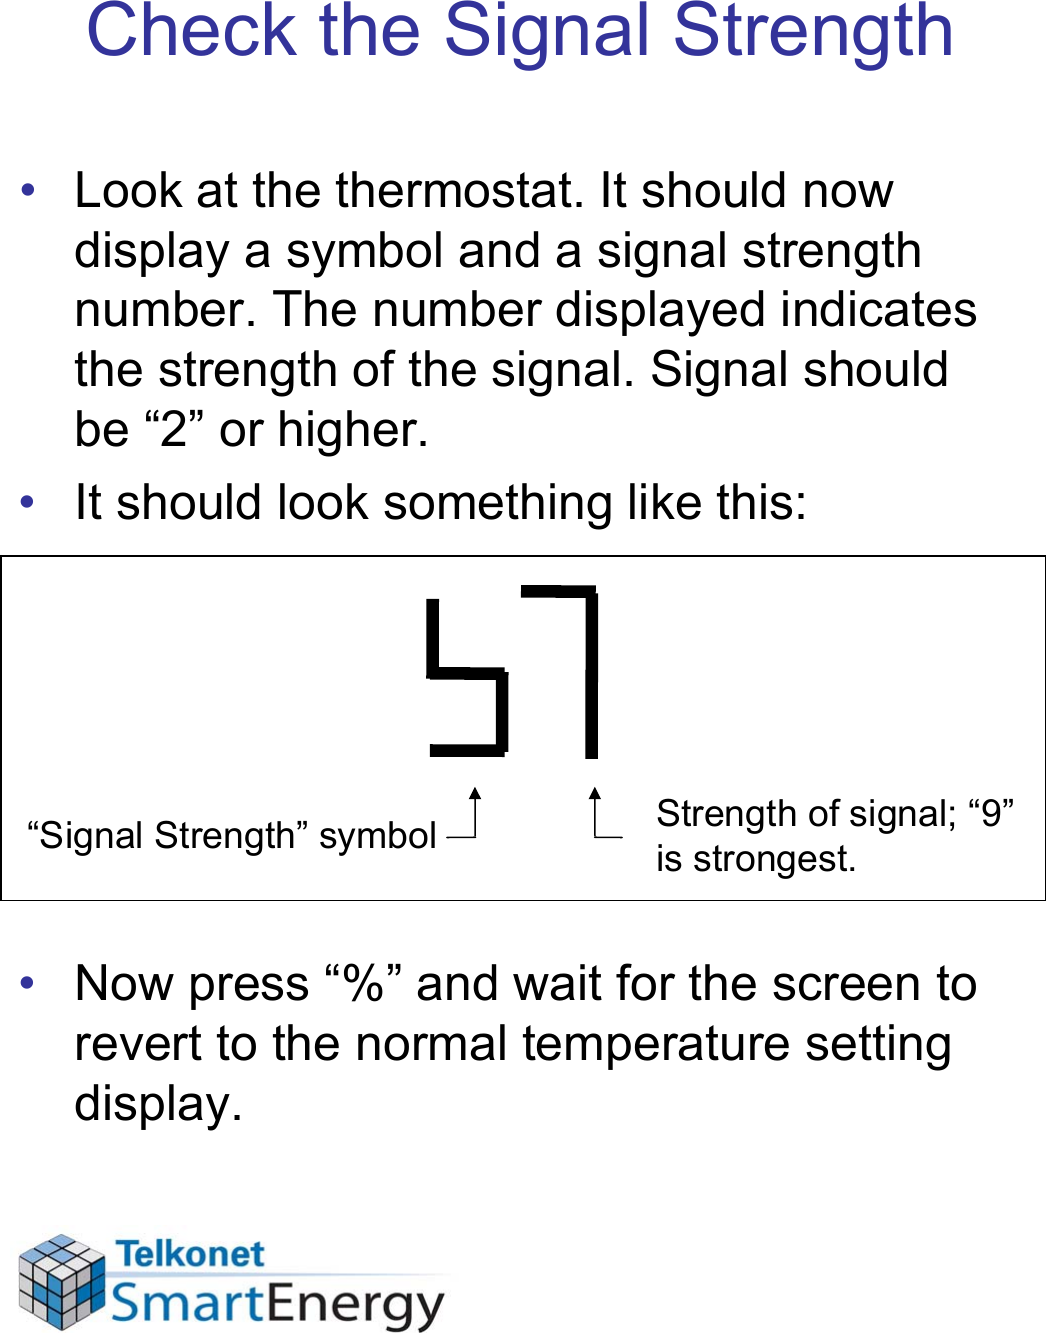 Check the Signal Strength• Look at the thermostat. It should now display a symbol and a signal strength number. The number displayed indicates the strength of the signal. Signal should be “2” or higher.• It should look something like this:• Now press “%” and wait for the screen to revert to the normal temperature setting display.“Signal Strength” symbol Strength of signal; “9” is strongest.